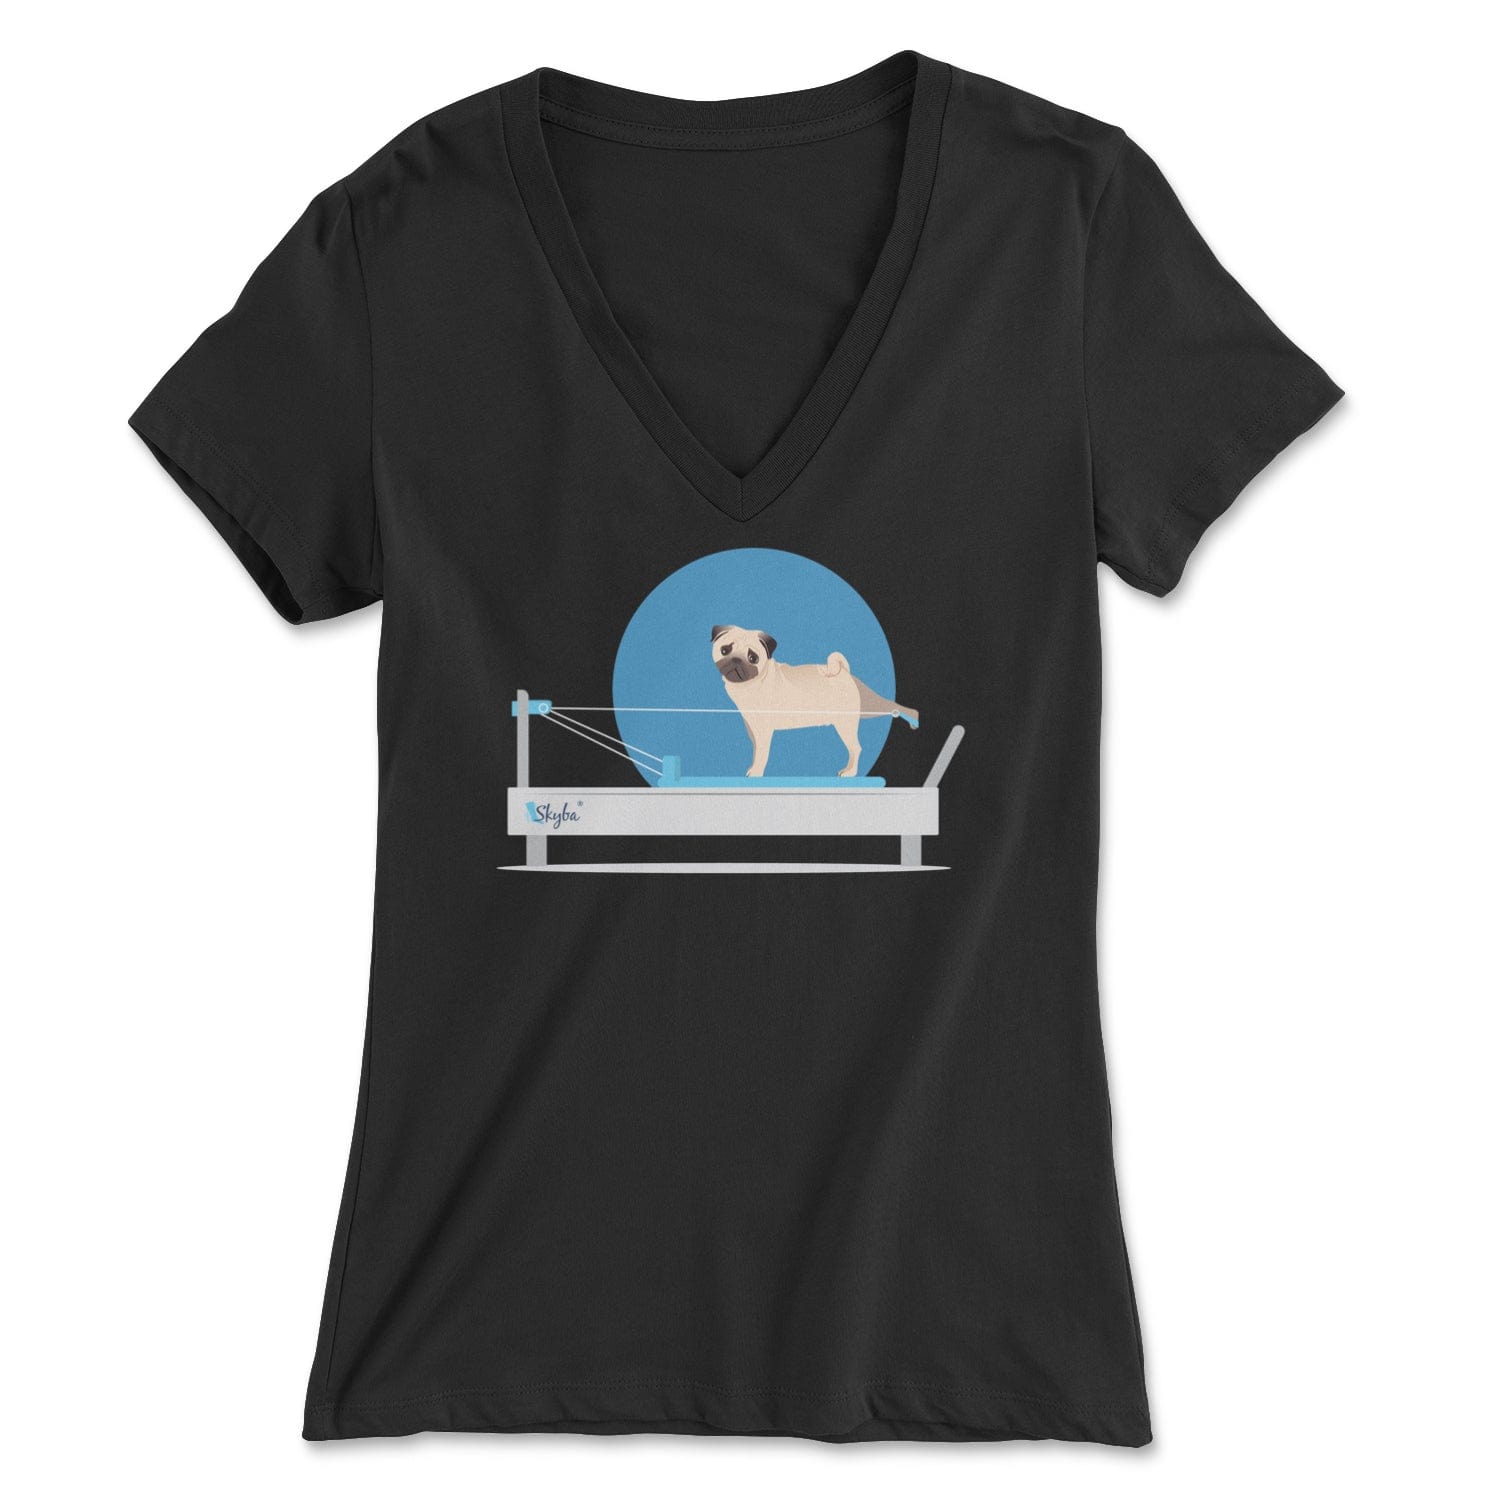 Pug on the Reformer - Women's V-Neck Tee Skyba Print Material